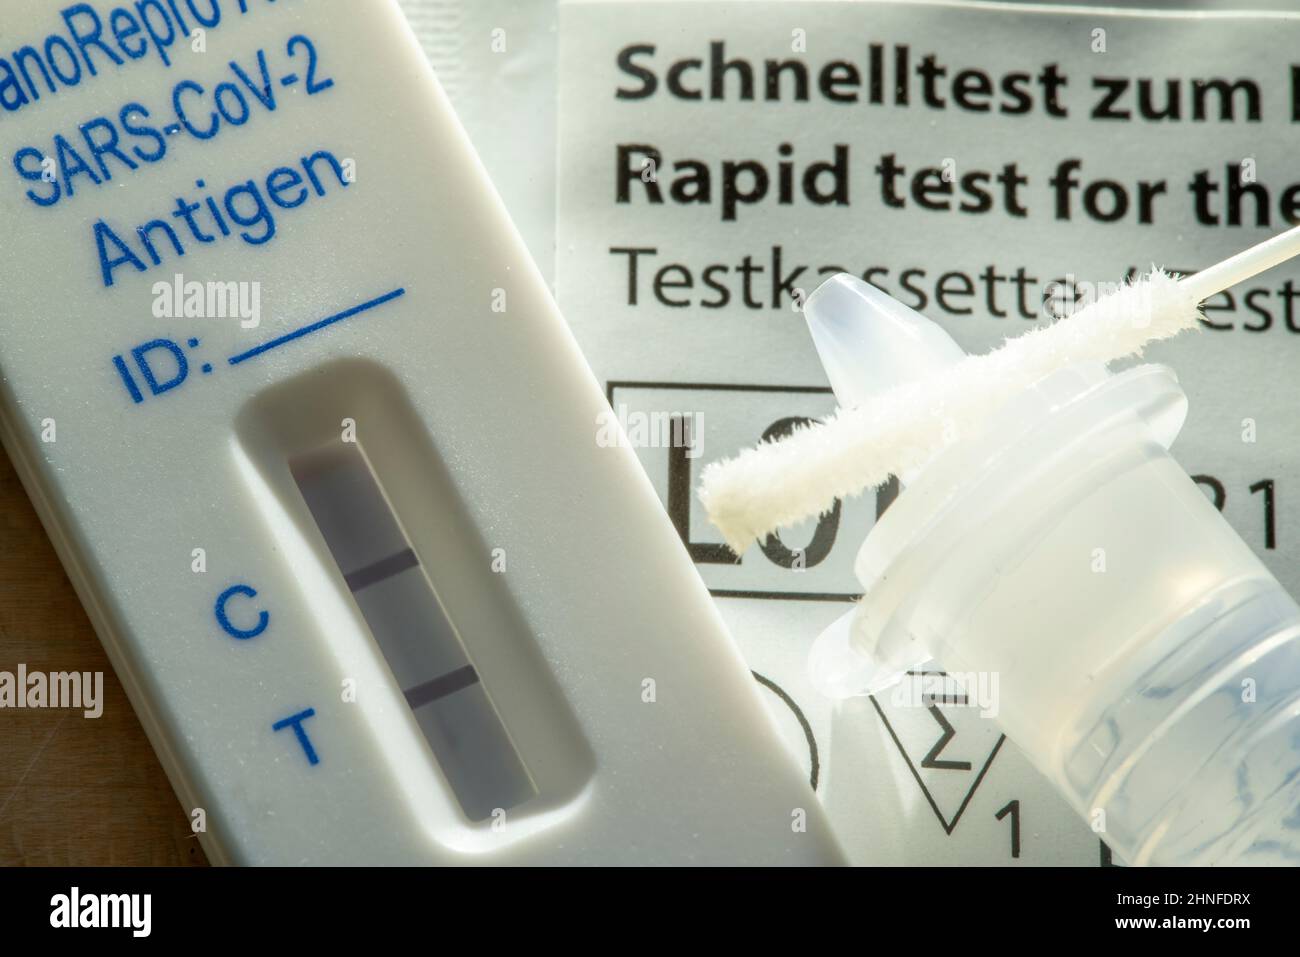 Positive Corona Antigen Rapid Test, lay test, self-test, for the detection of SARS-CoV-2 infection, test result positive, Stock Photo